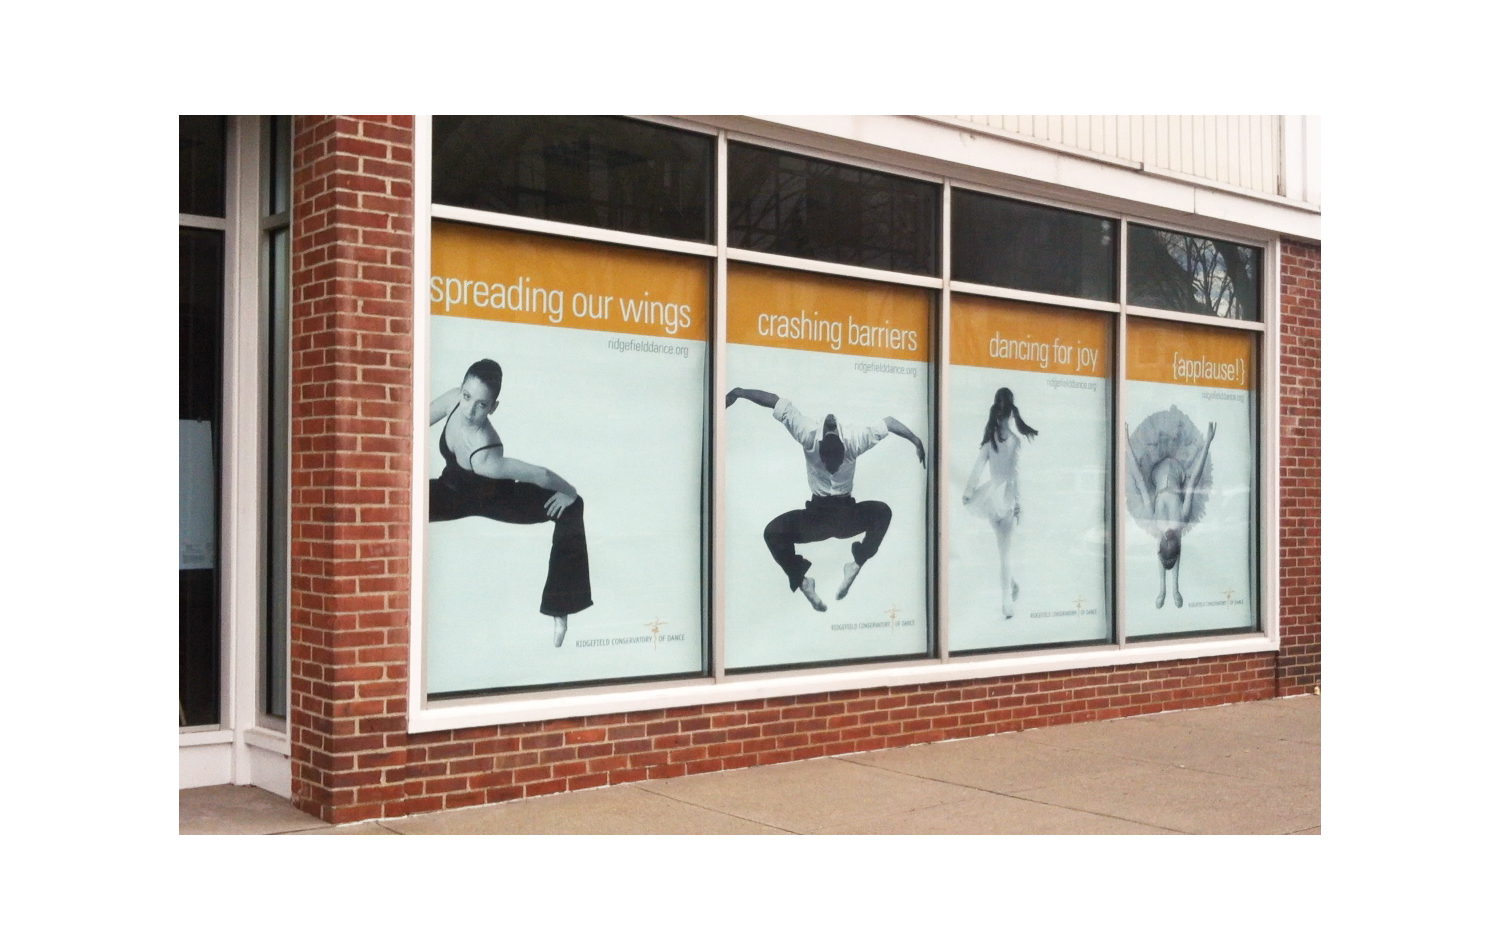 Life-size dance imagery fills enormous window banners that convey unique branding while transforming view at this performing arts school